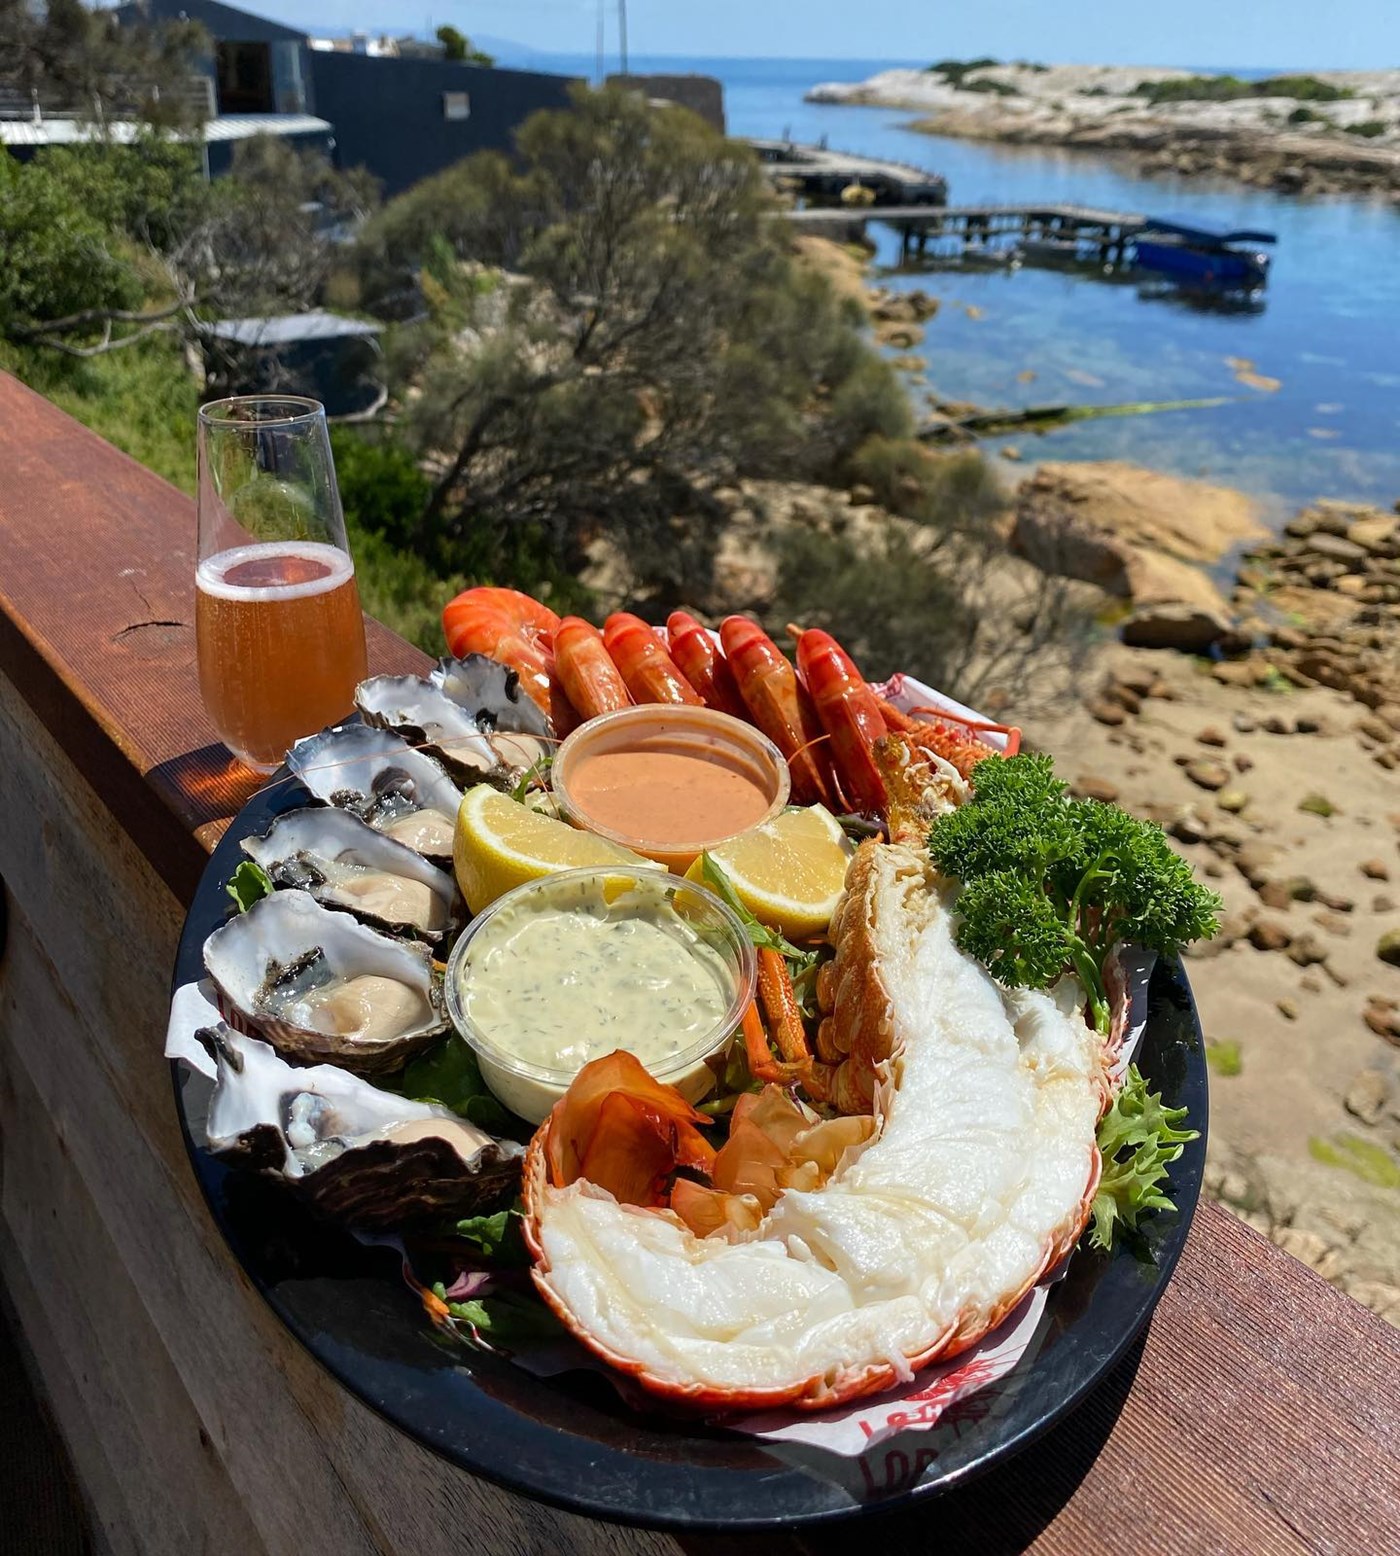 Lobster, oysters and prawns at Lobster Shack in Tasmania